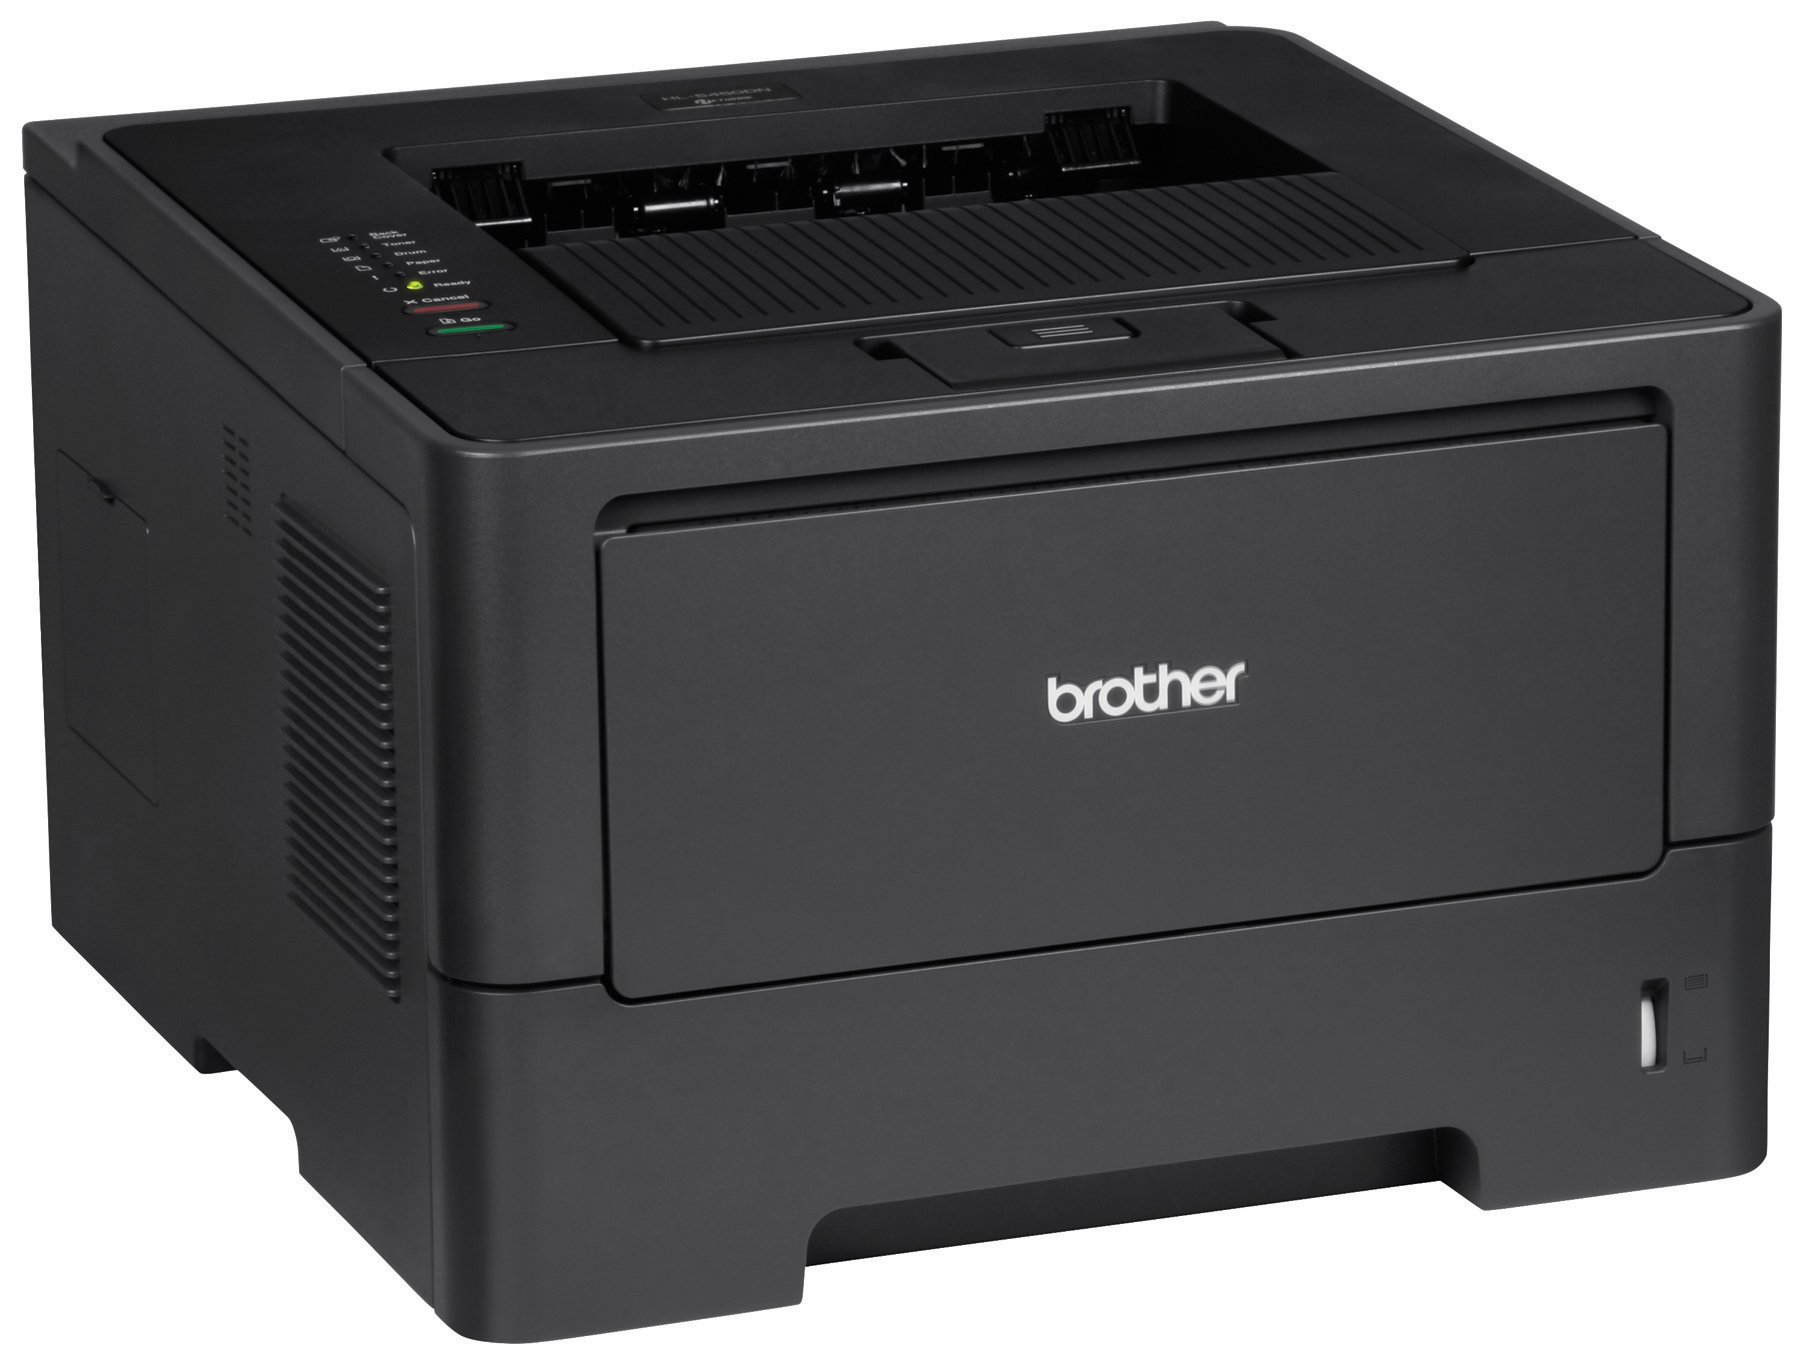 Brother HL5450DN High-Speed Laser Printer with Networking and Duplex, Amazon Dash Replenishment Ready